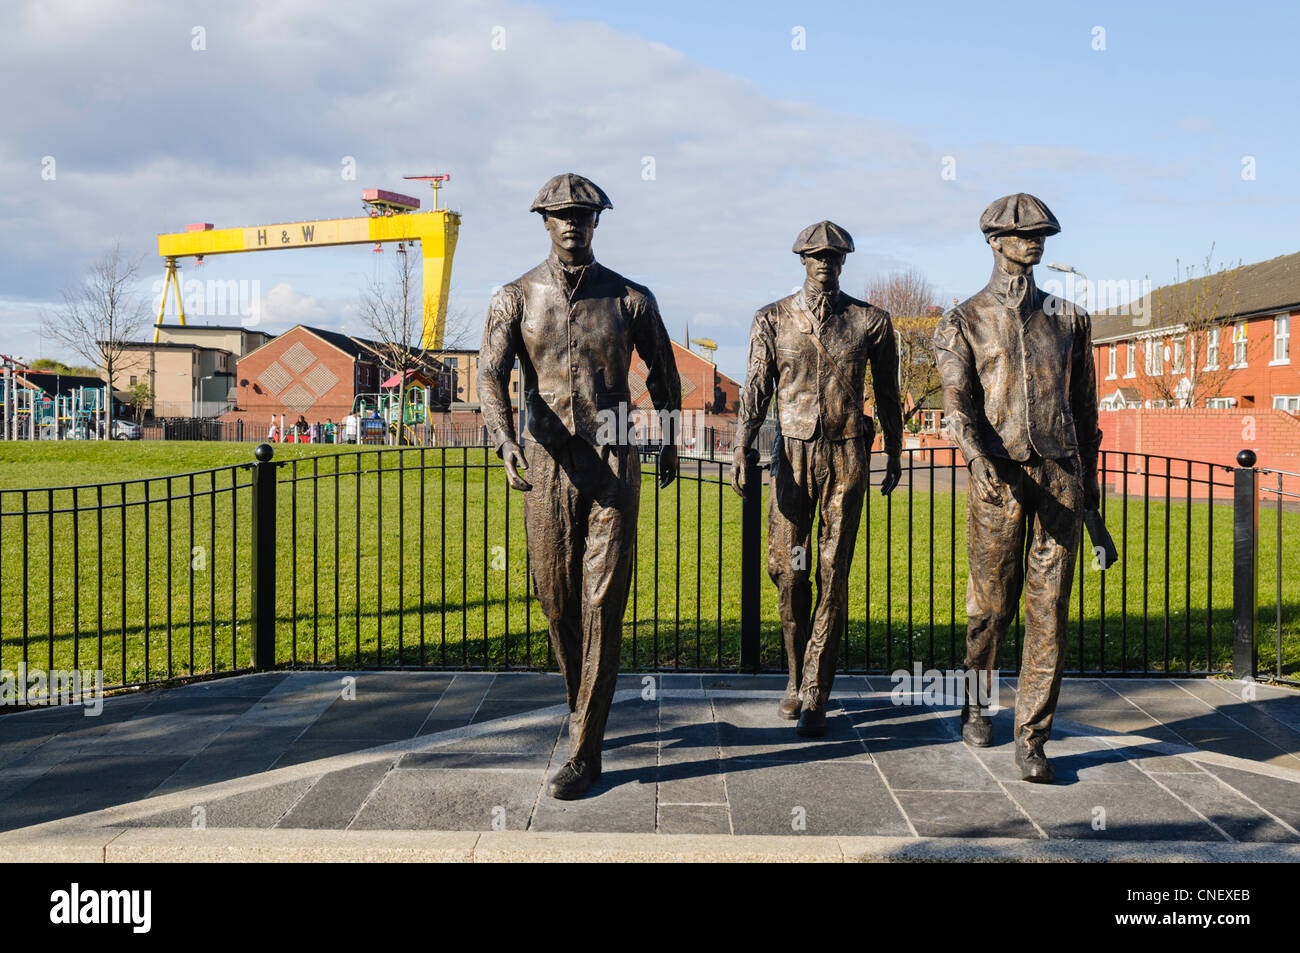 Yardmen statues to commemorate the men who worked in the Harland and Wolff shipyard. Artist: Ross Wilson.ctor Stock Photo